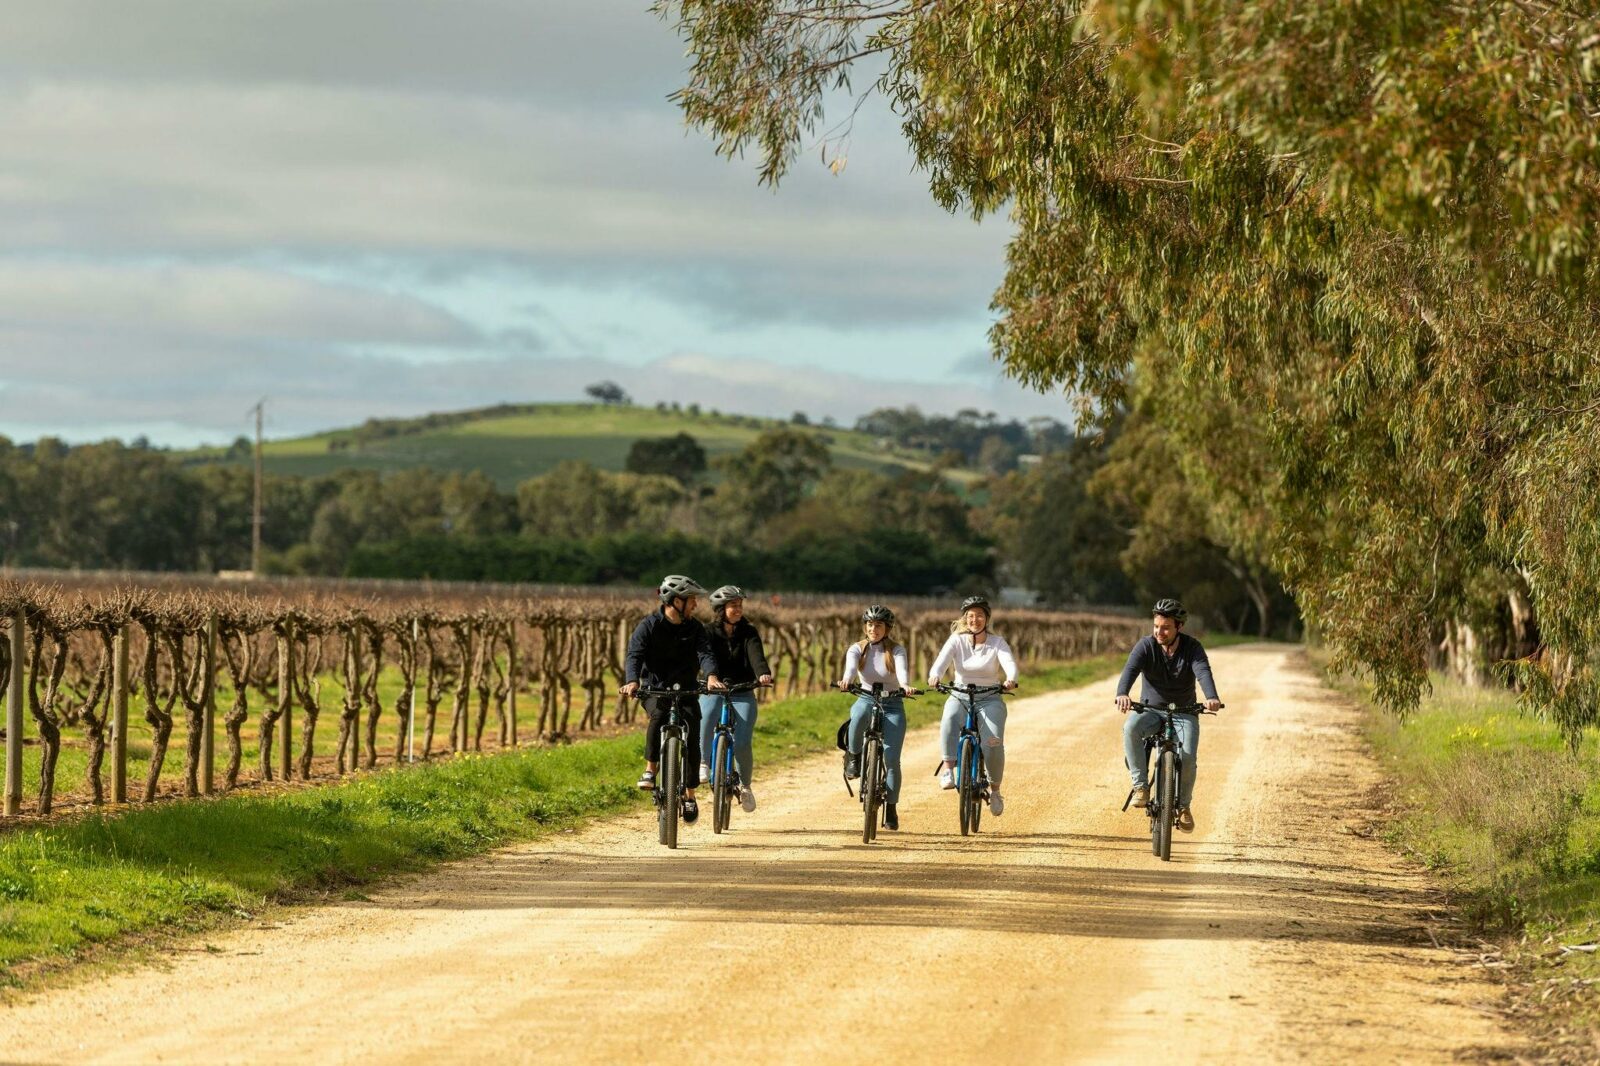 Ride through beautiful vineyards in The Barossa Valley and Adelaide Hills